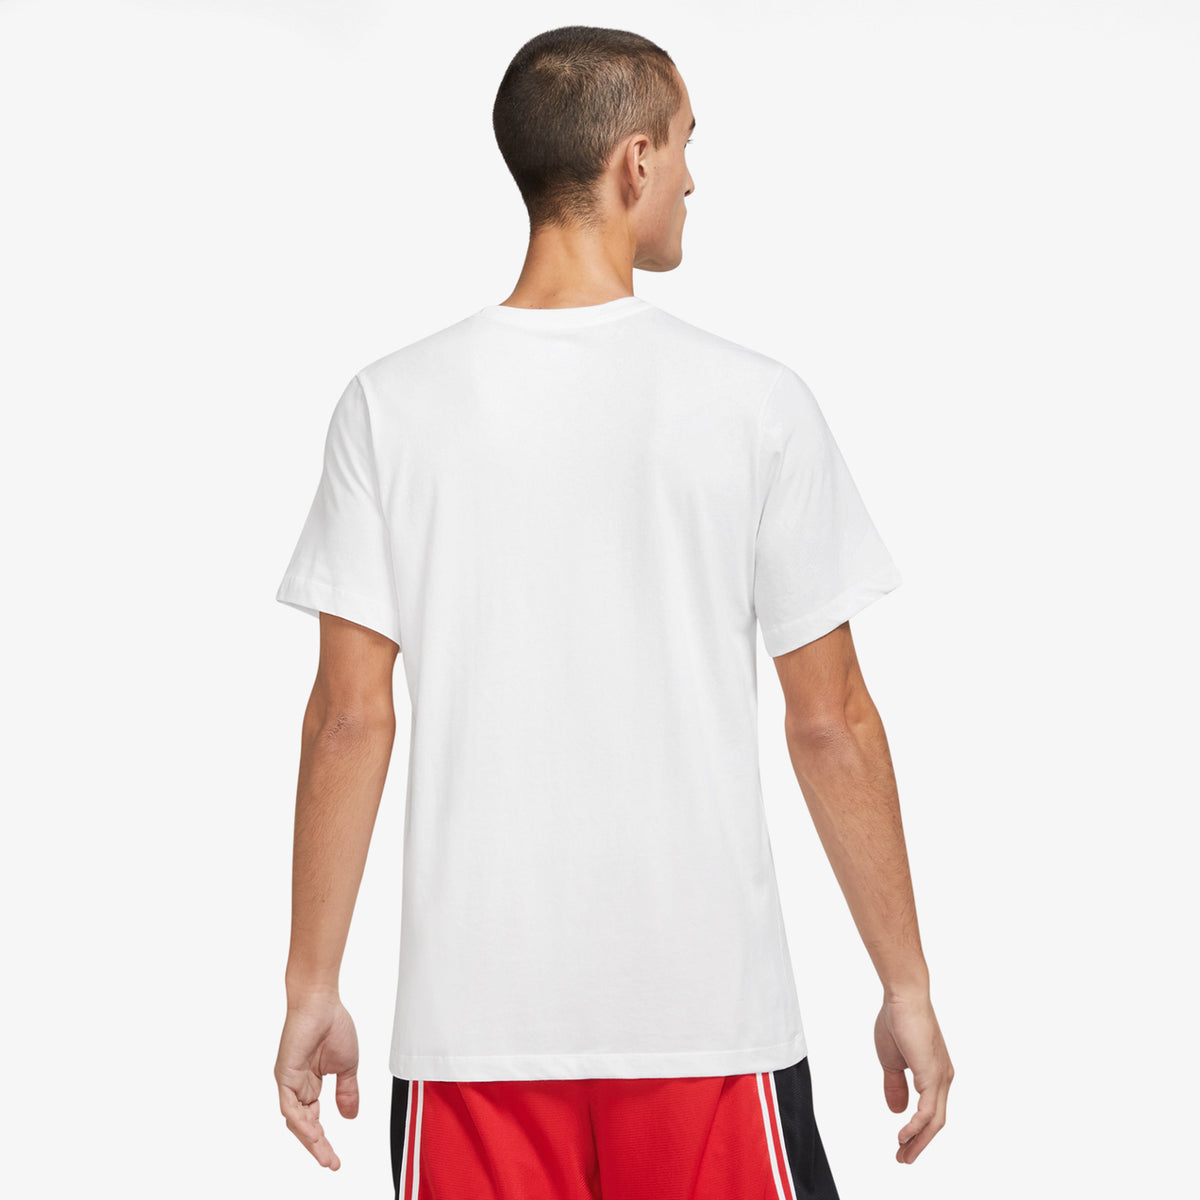 All About The Game T-Shirt - White